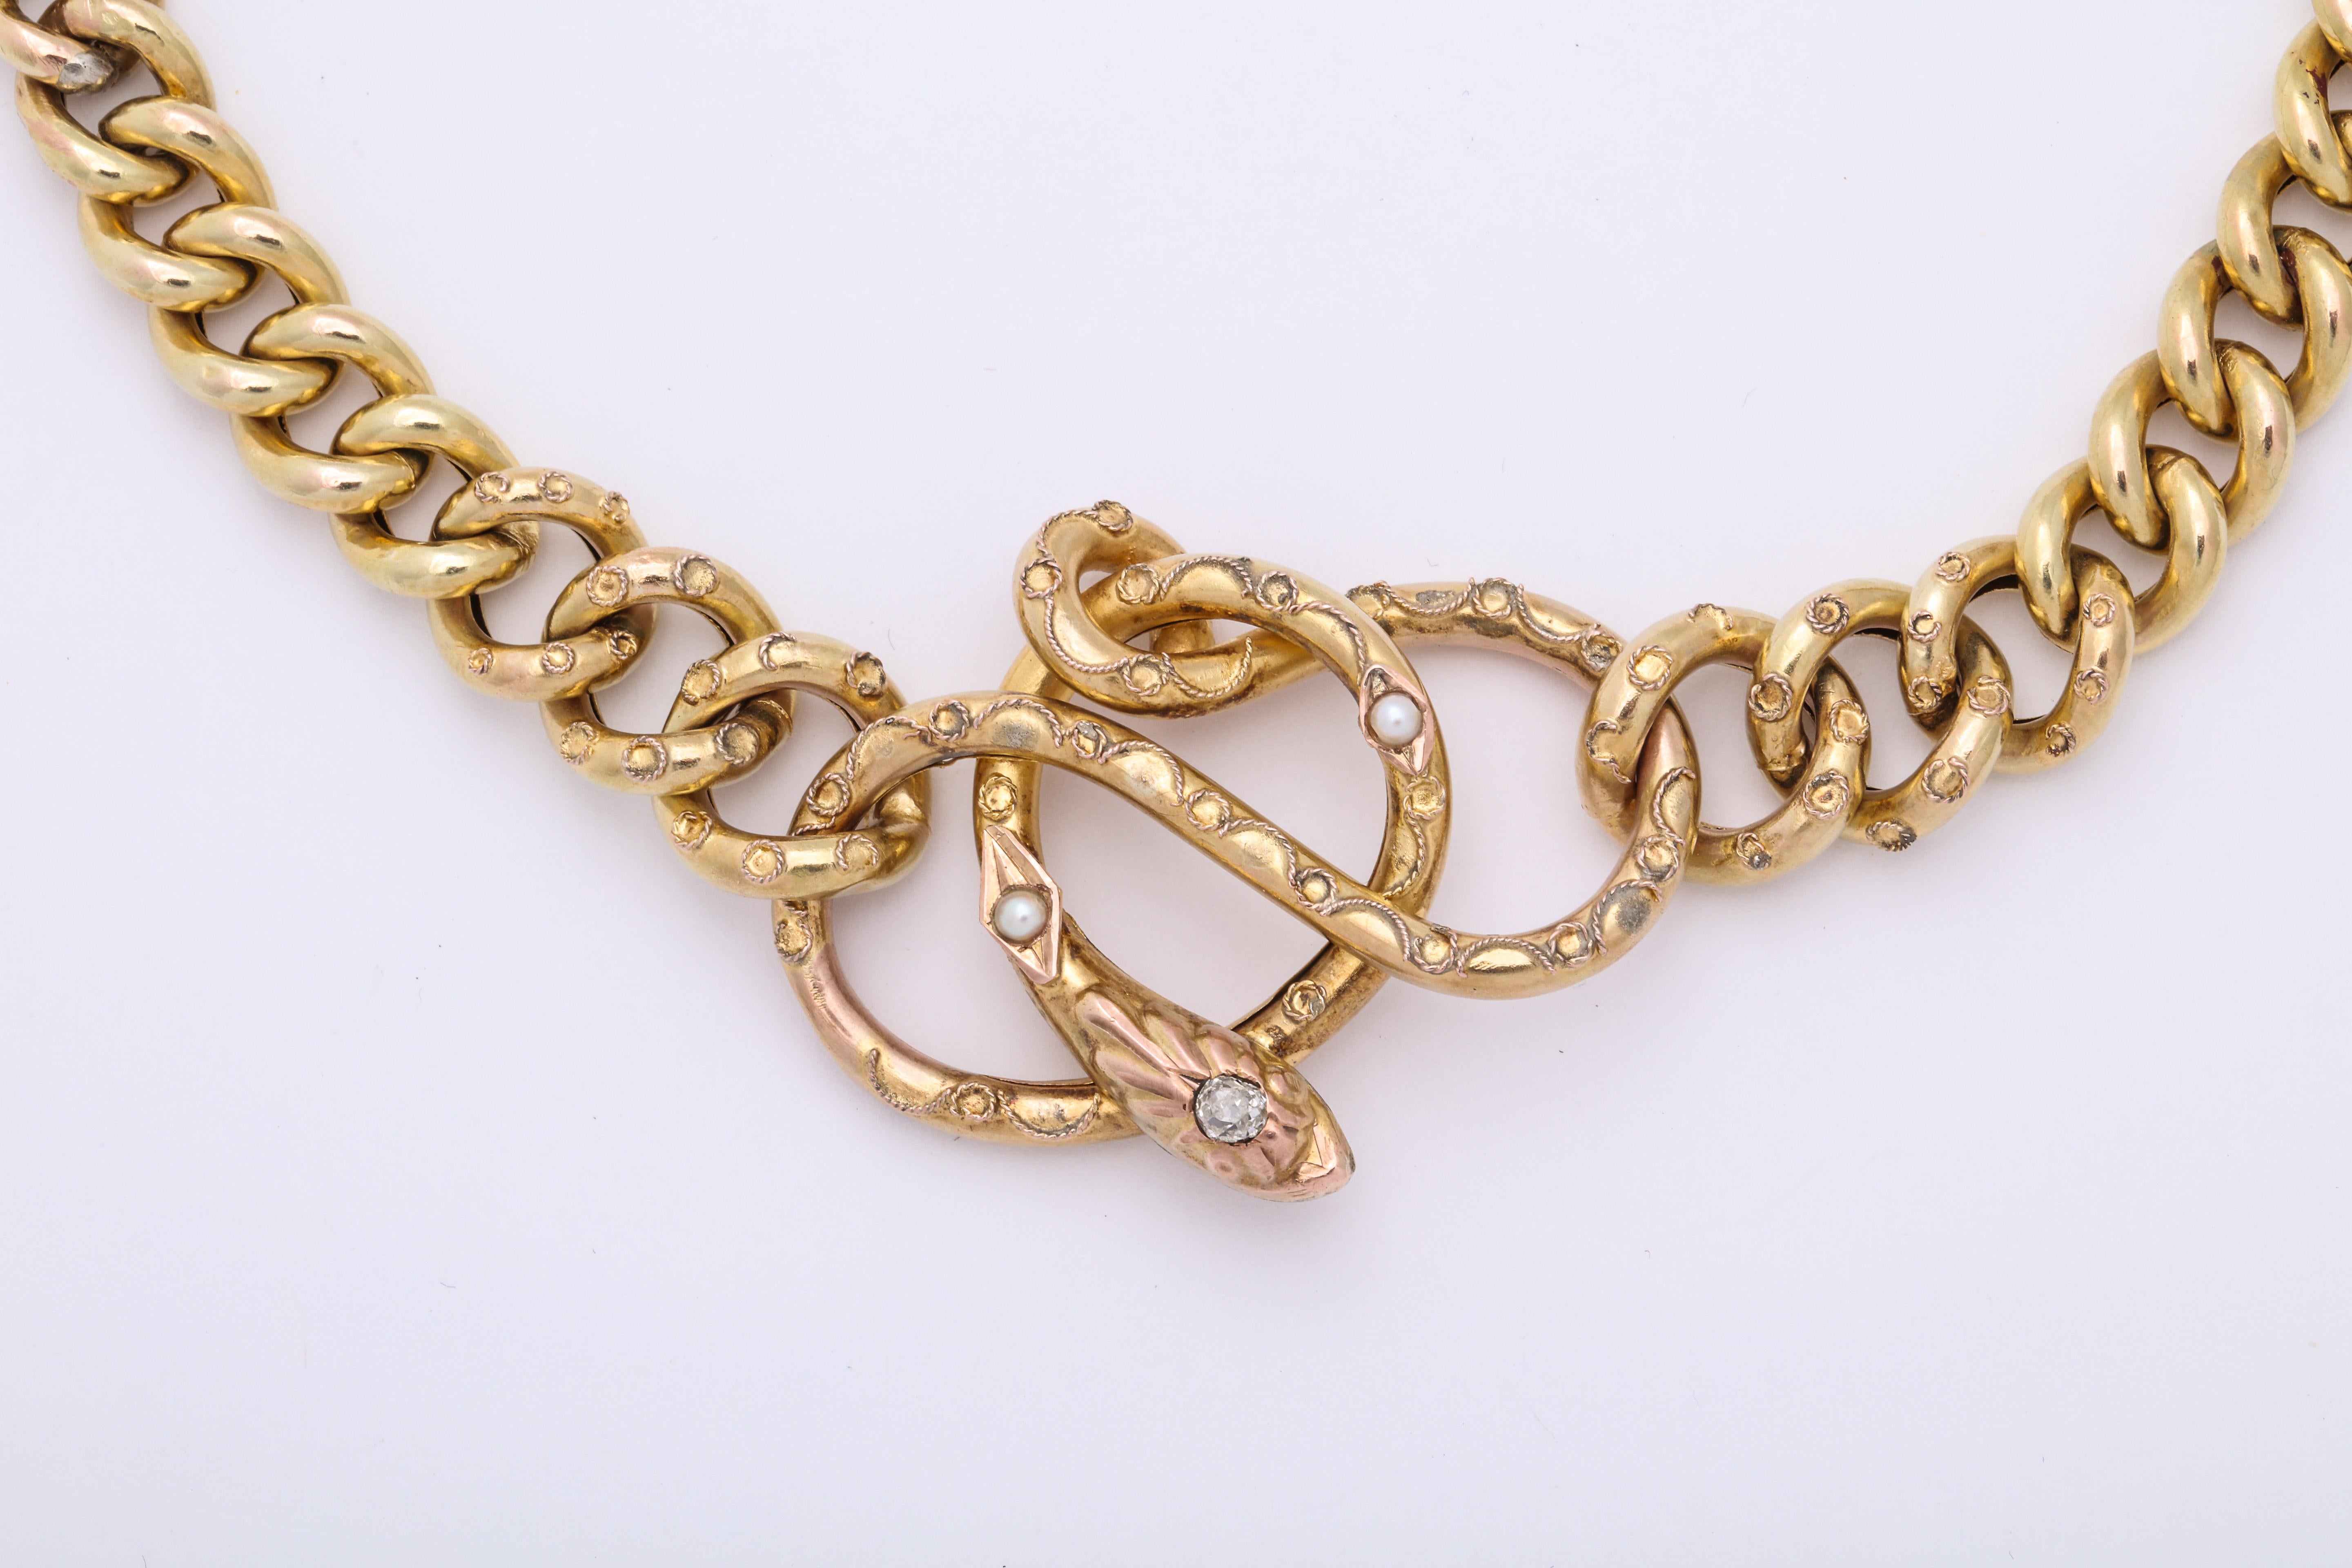 A great Antique snake necklace in 14 kt gold with diamond and pearls . The necklace can be reduced to make a bracelet 